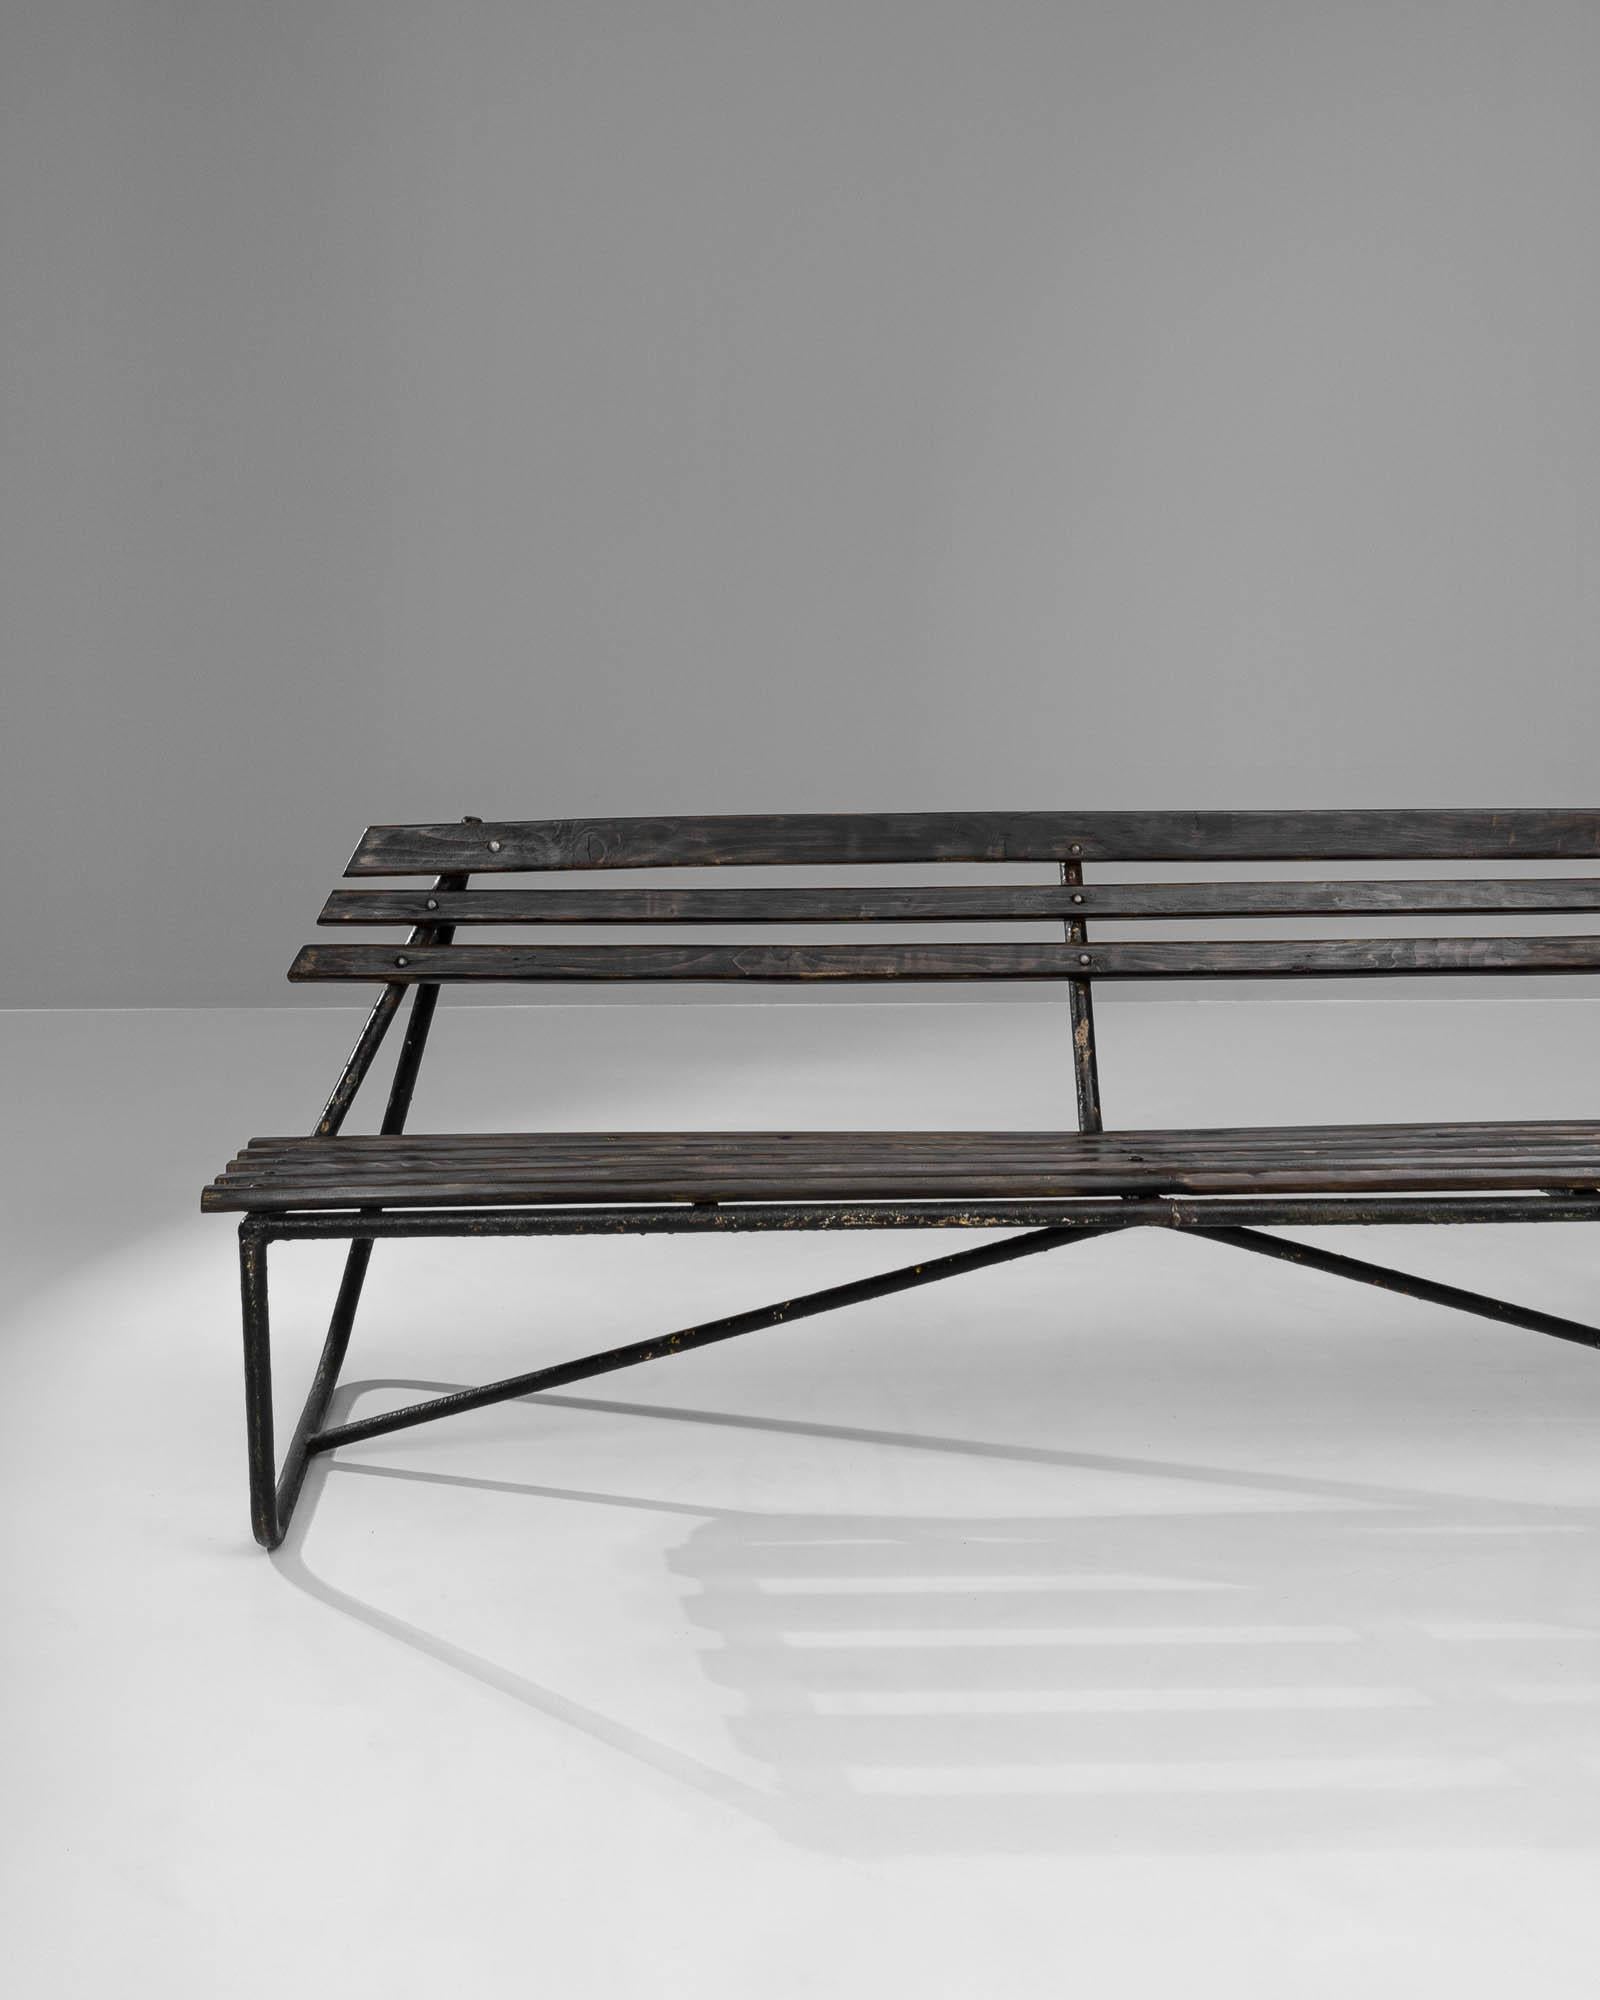 This 20th Century French Metal & Wooden Bench combines the sleek lines of industrial design with the warm, organic feel of wood to create a striking and functional piece of furniture. The bench features a durable metal frame with an angular,